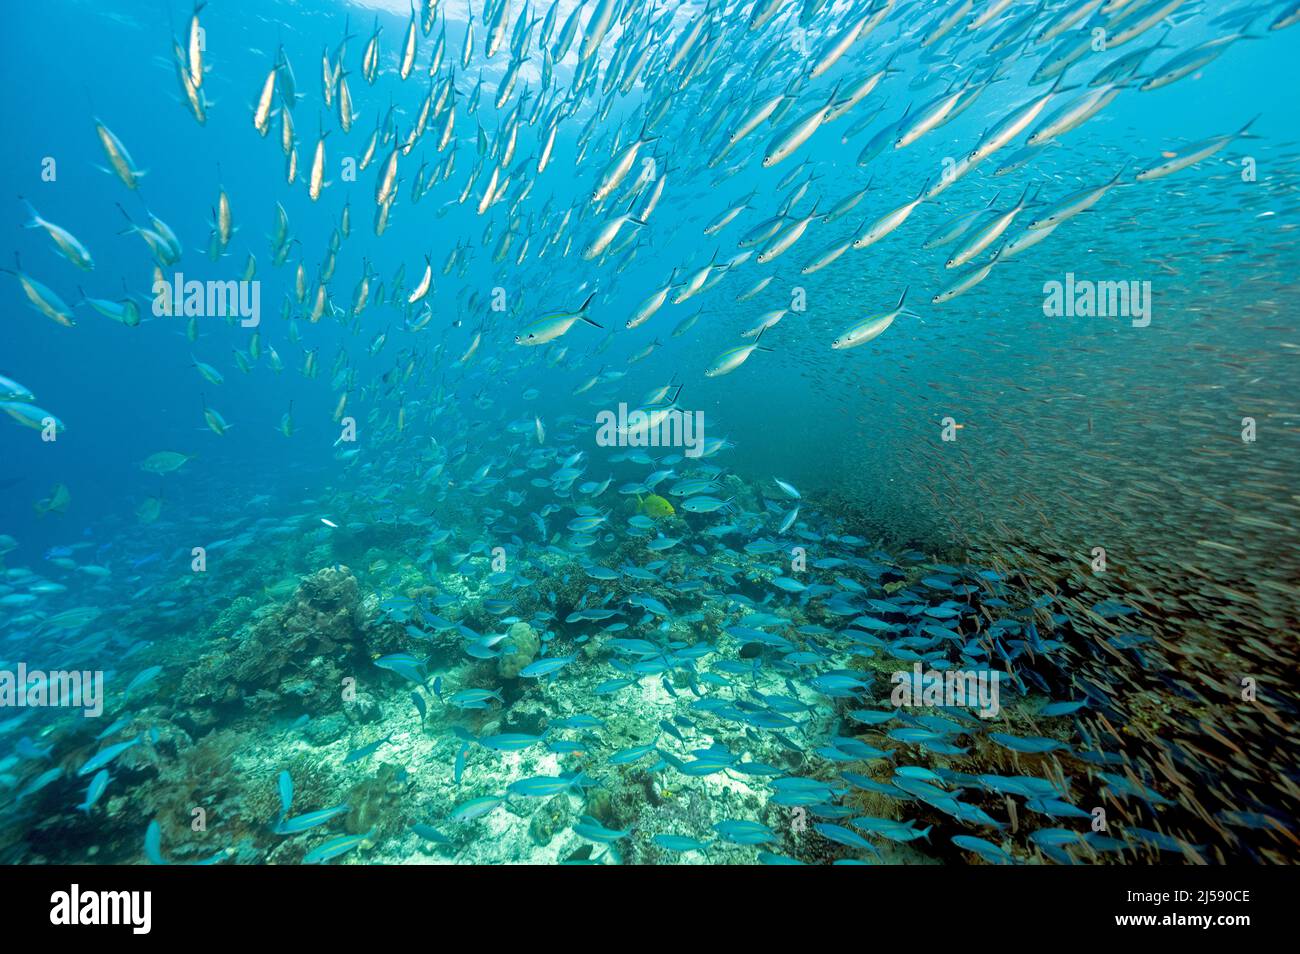 Massive school of fusiliers and glass fishes, Raja Ampat Indonesia. Stock Photo